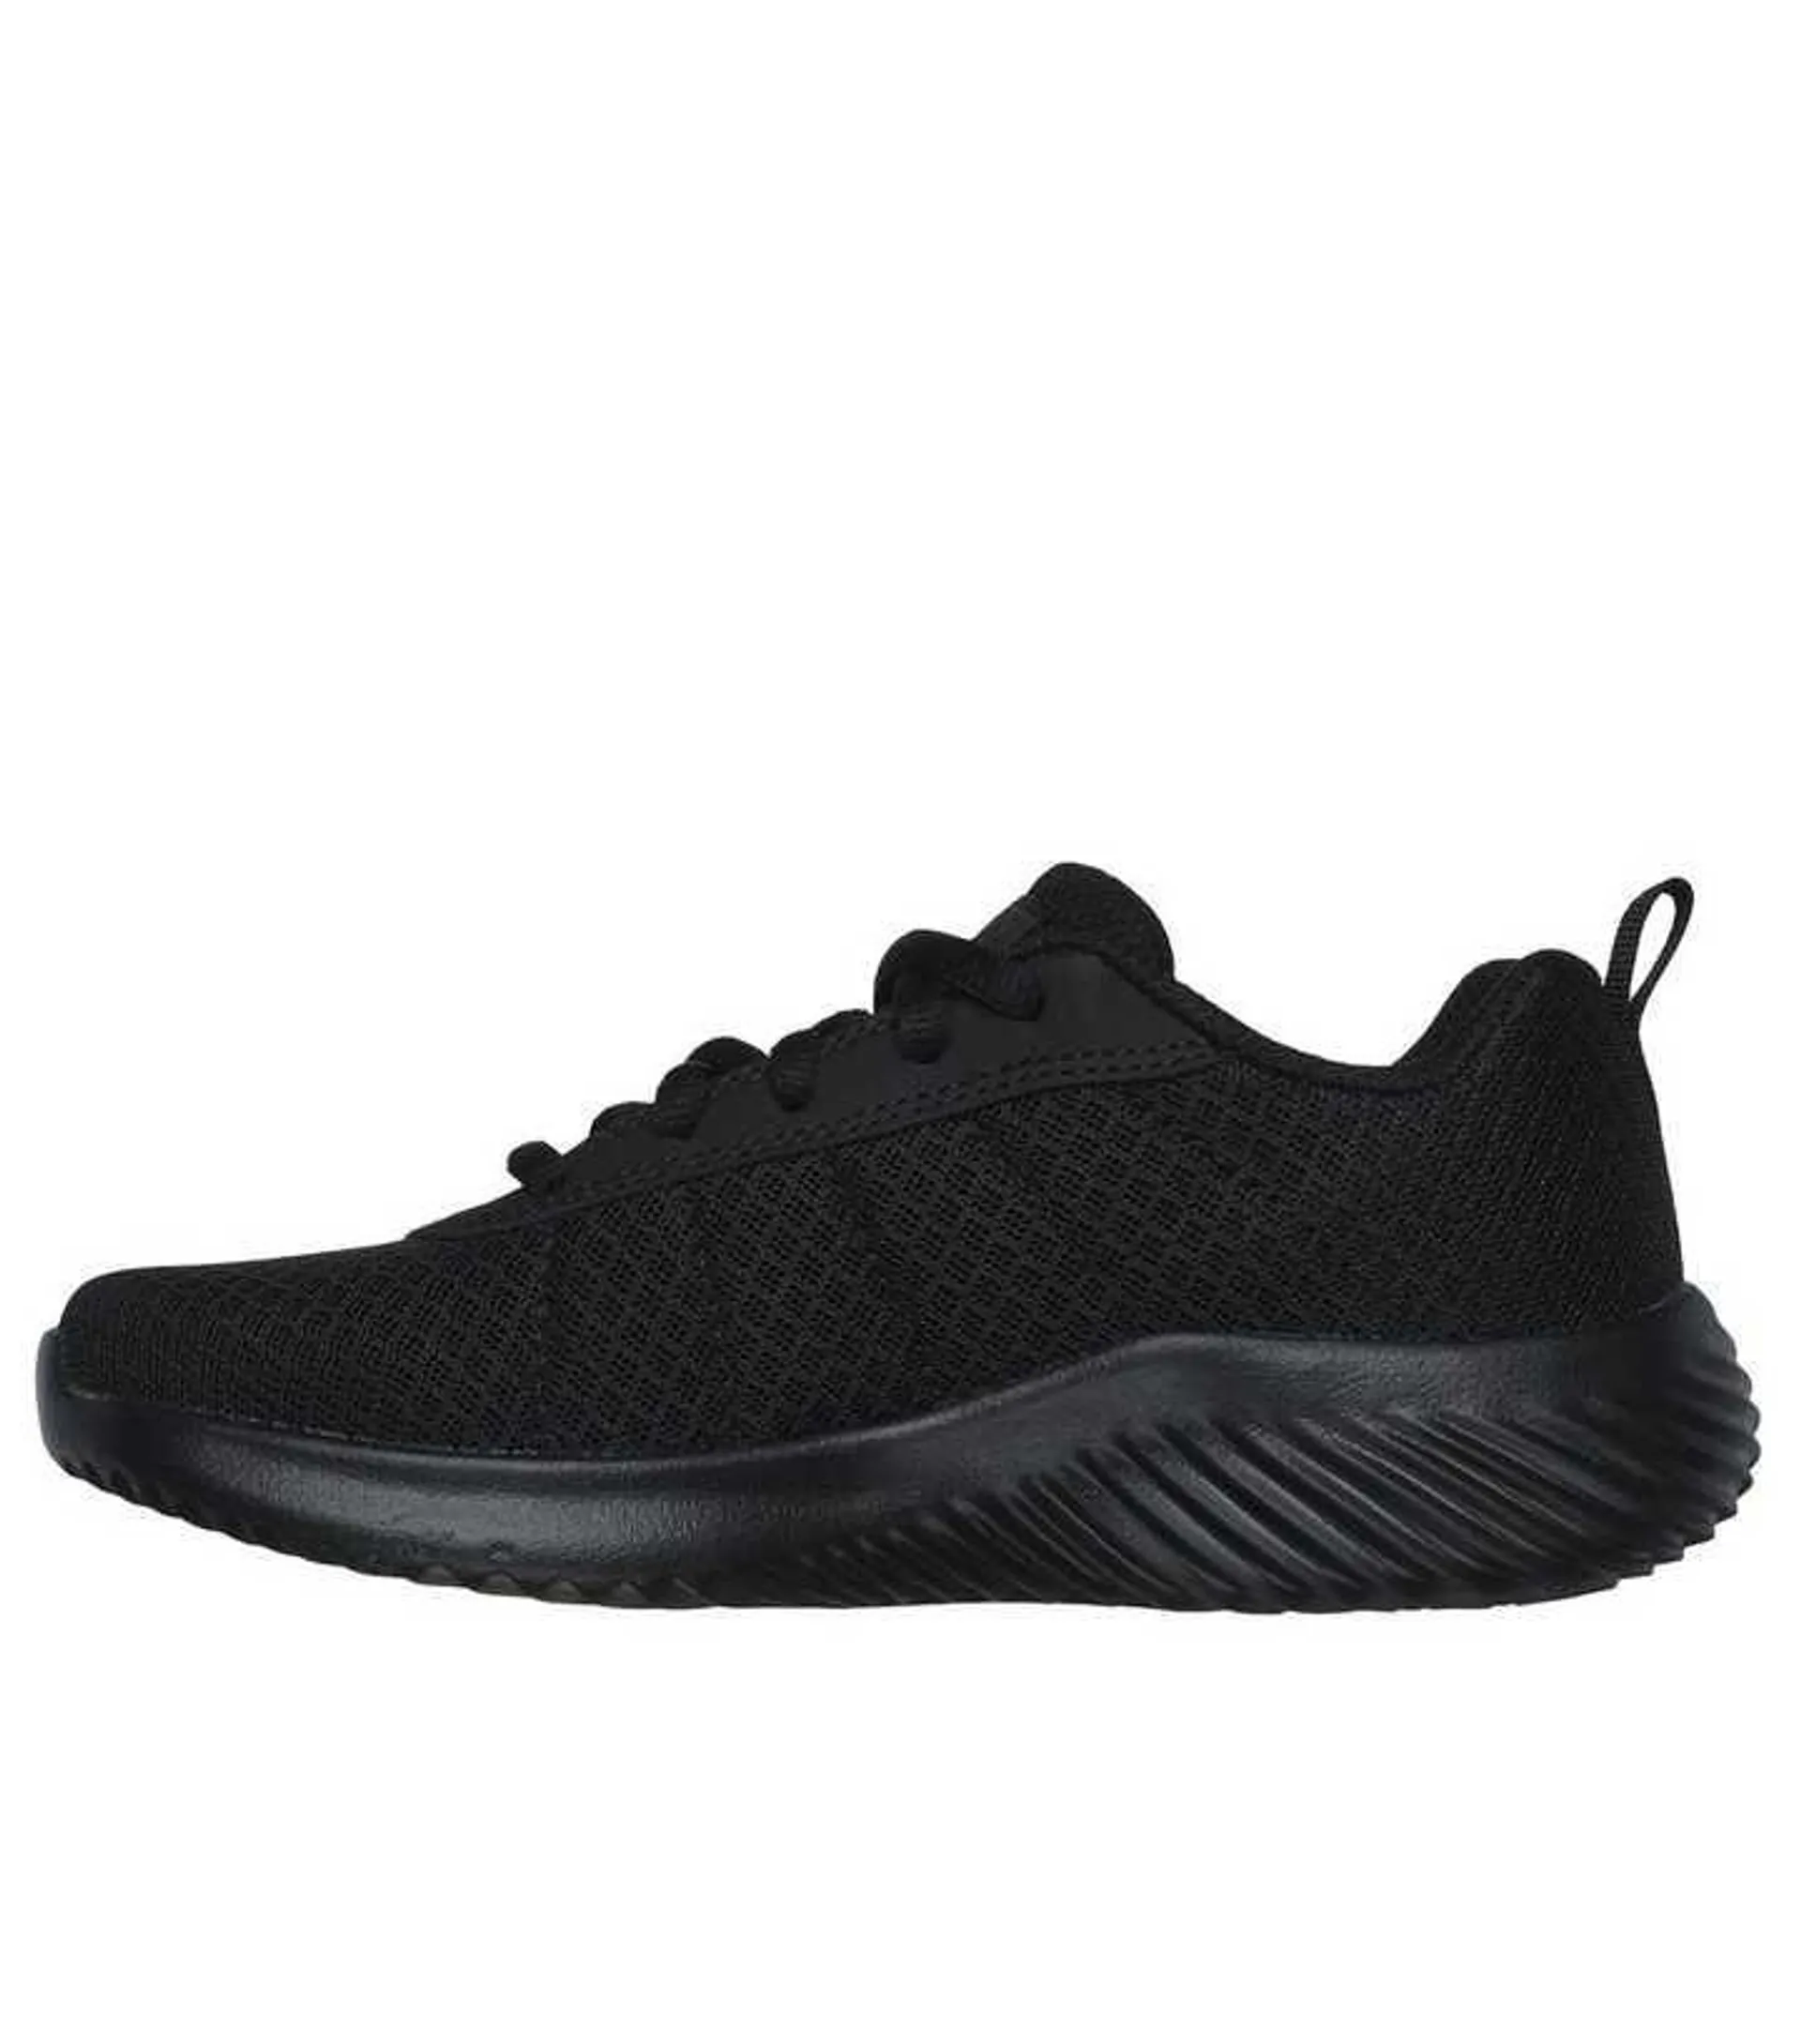 Skechers Kids Black Bounder Lace Up Mesh Trainers